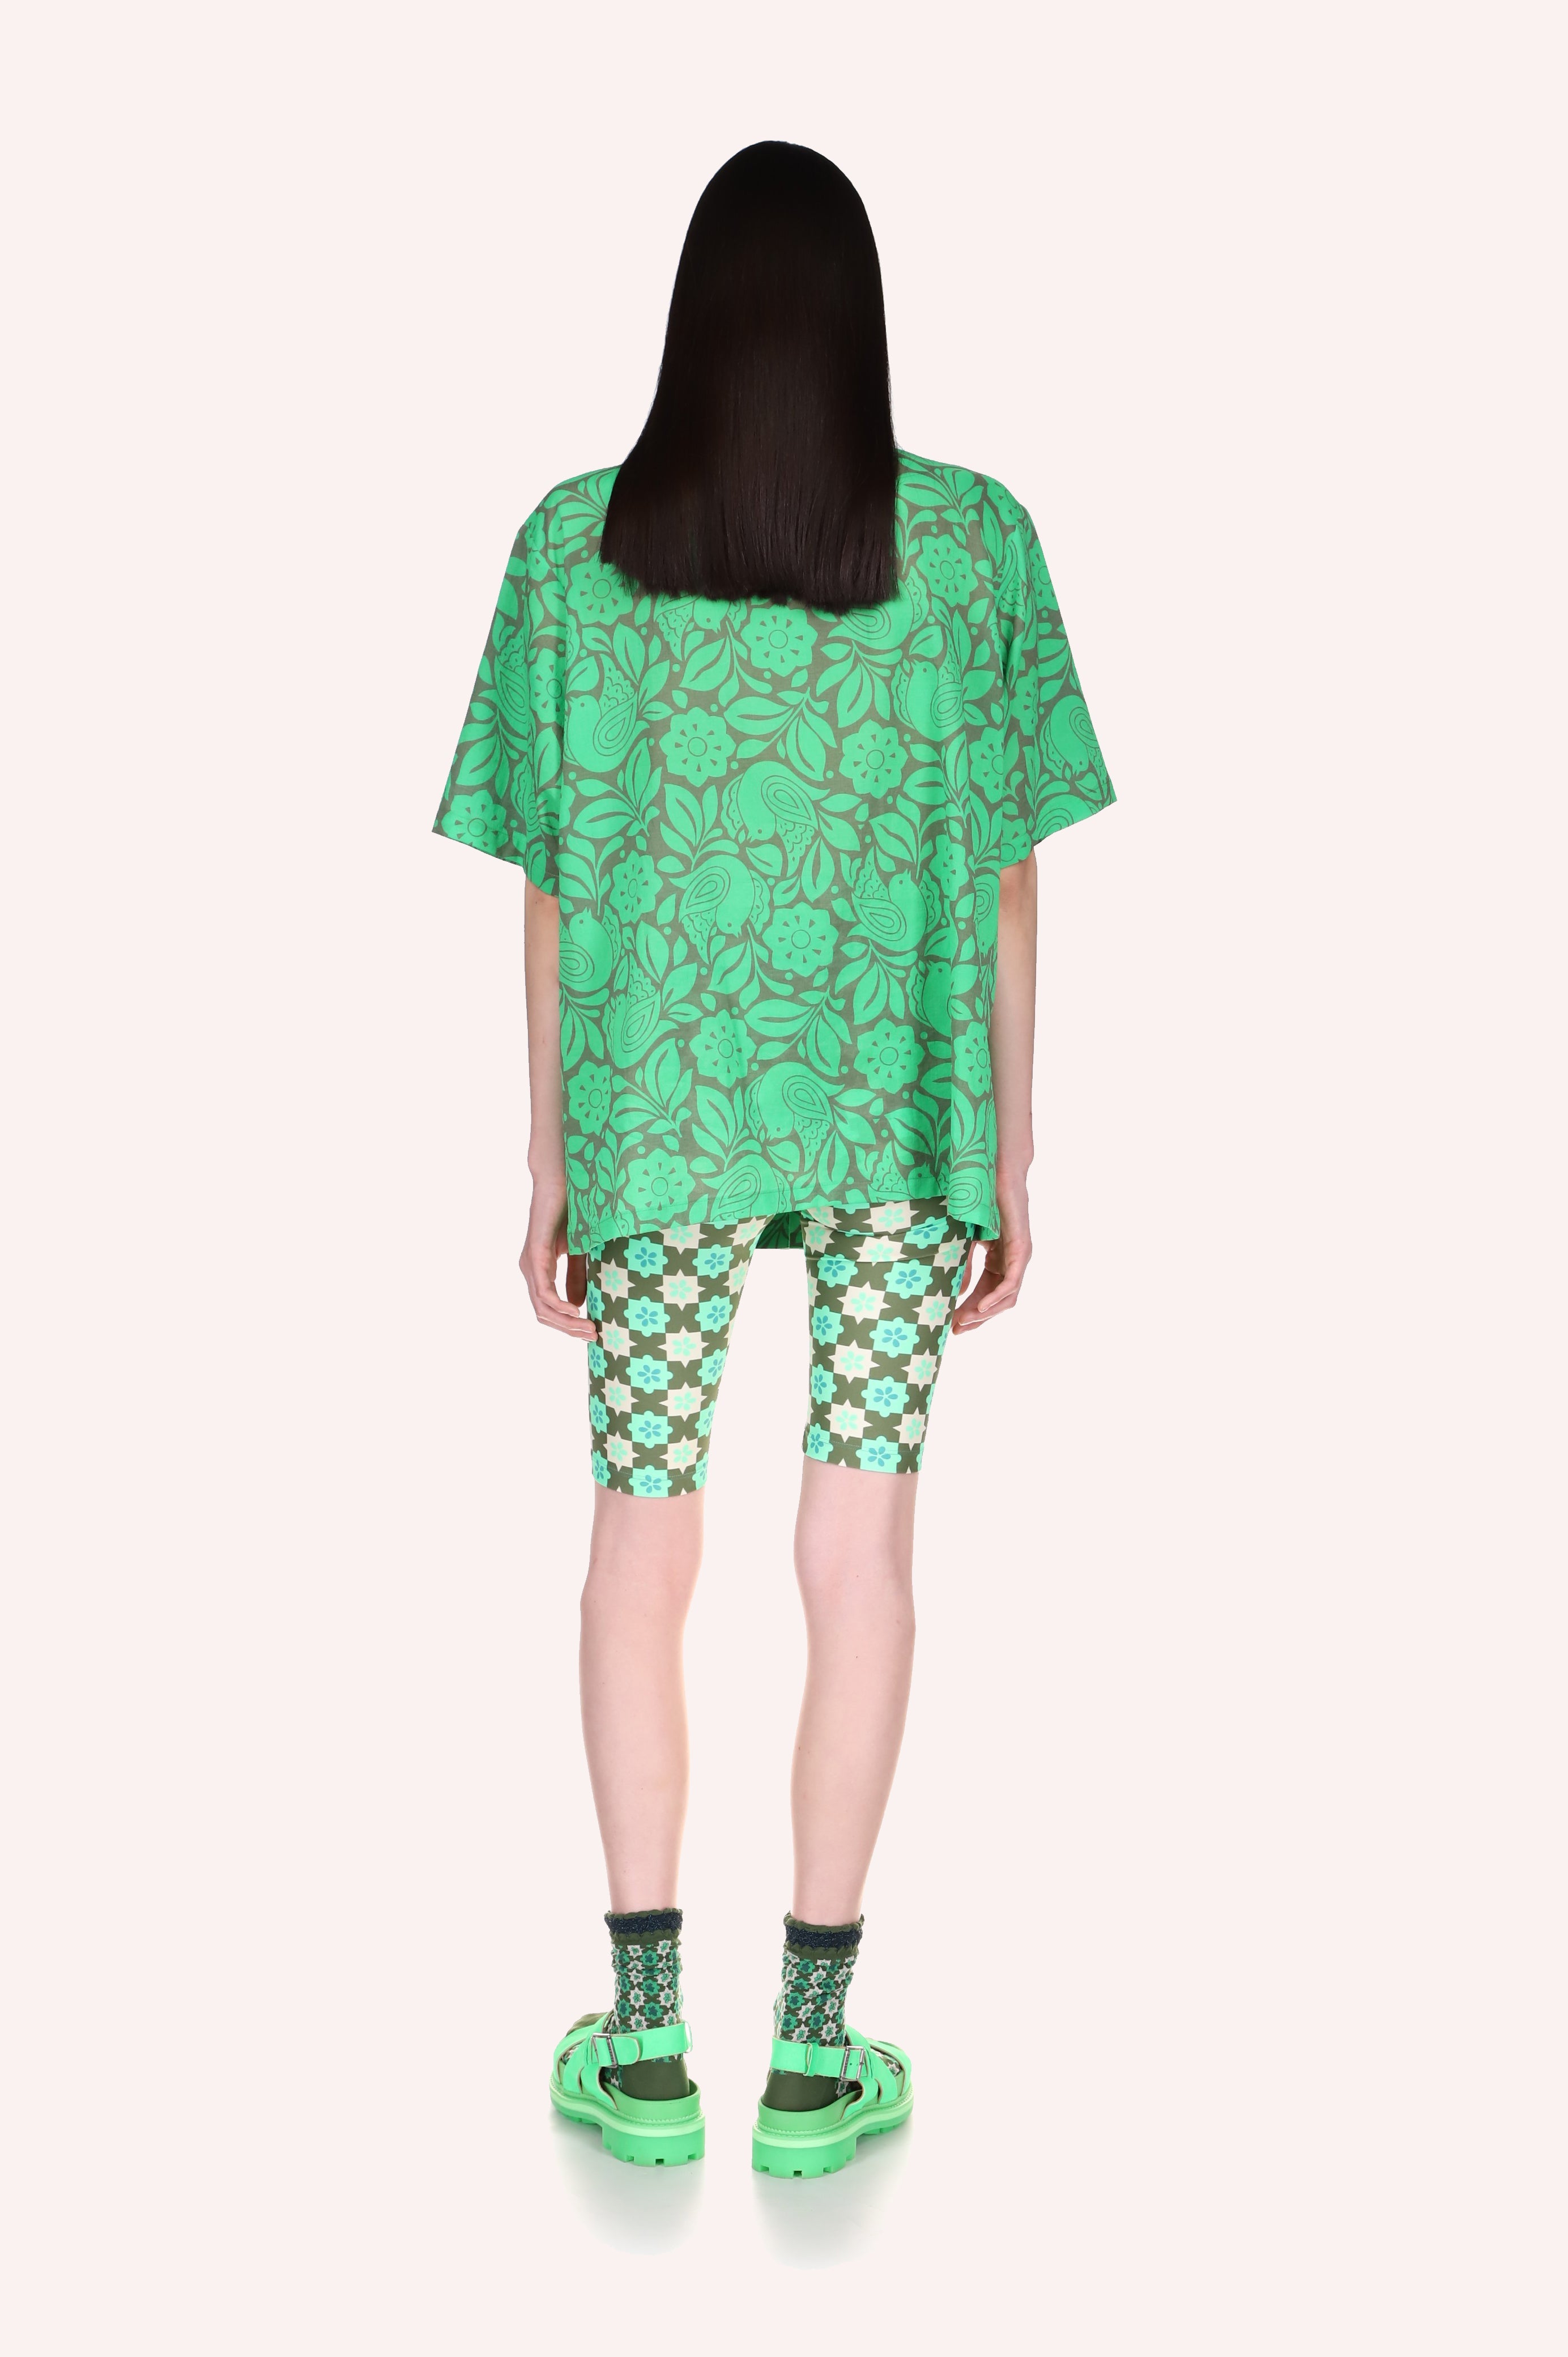 Utopian Gingham Bike Shorts Glo Green at the hips high and very tight